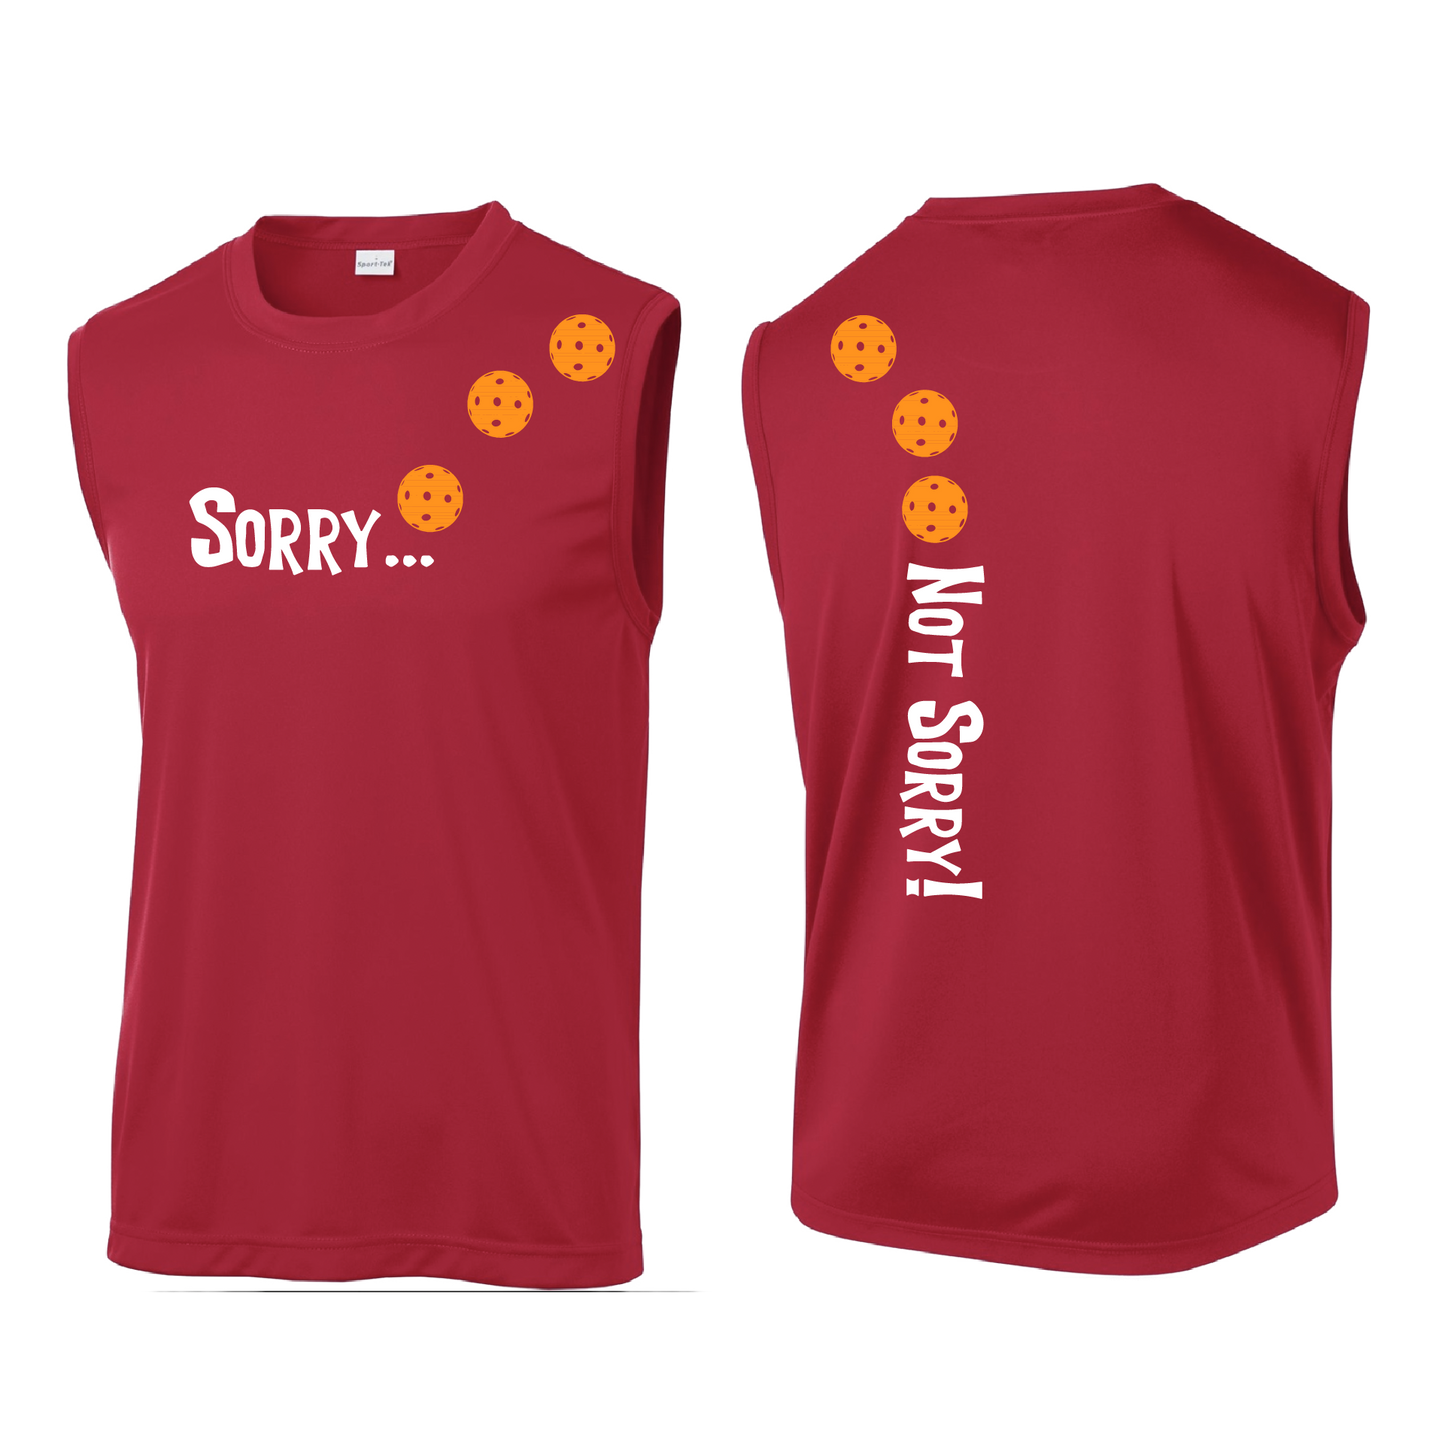 Design: Sorry...Not Sorry! with Customizable Ball Color - Choose: Green, Orange or Purple Men's Styles: Sleeveless  Shirts are lightweight, roomy and highly breathable. These moisture-wicking shirts are designed for athletic performance. They feature PosiCharge technology to lock in color and prevent logos from fading. Removable tag and set-in sleeves for comfort.